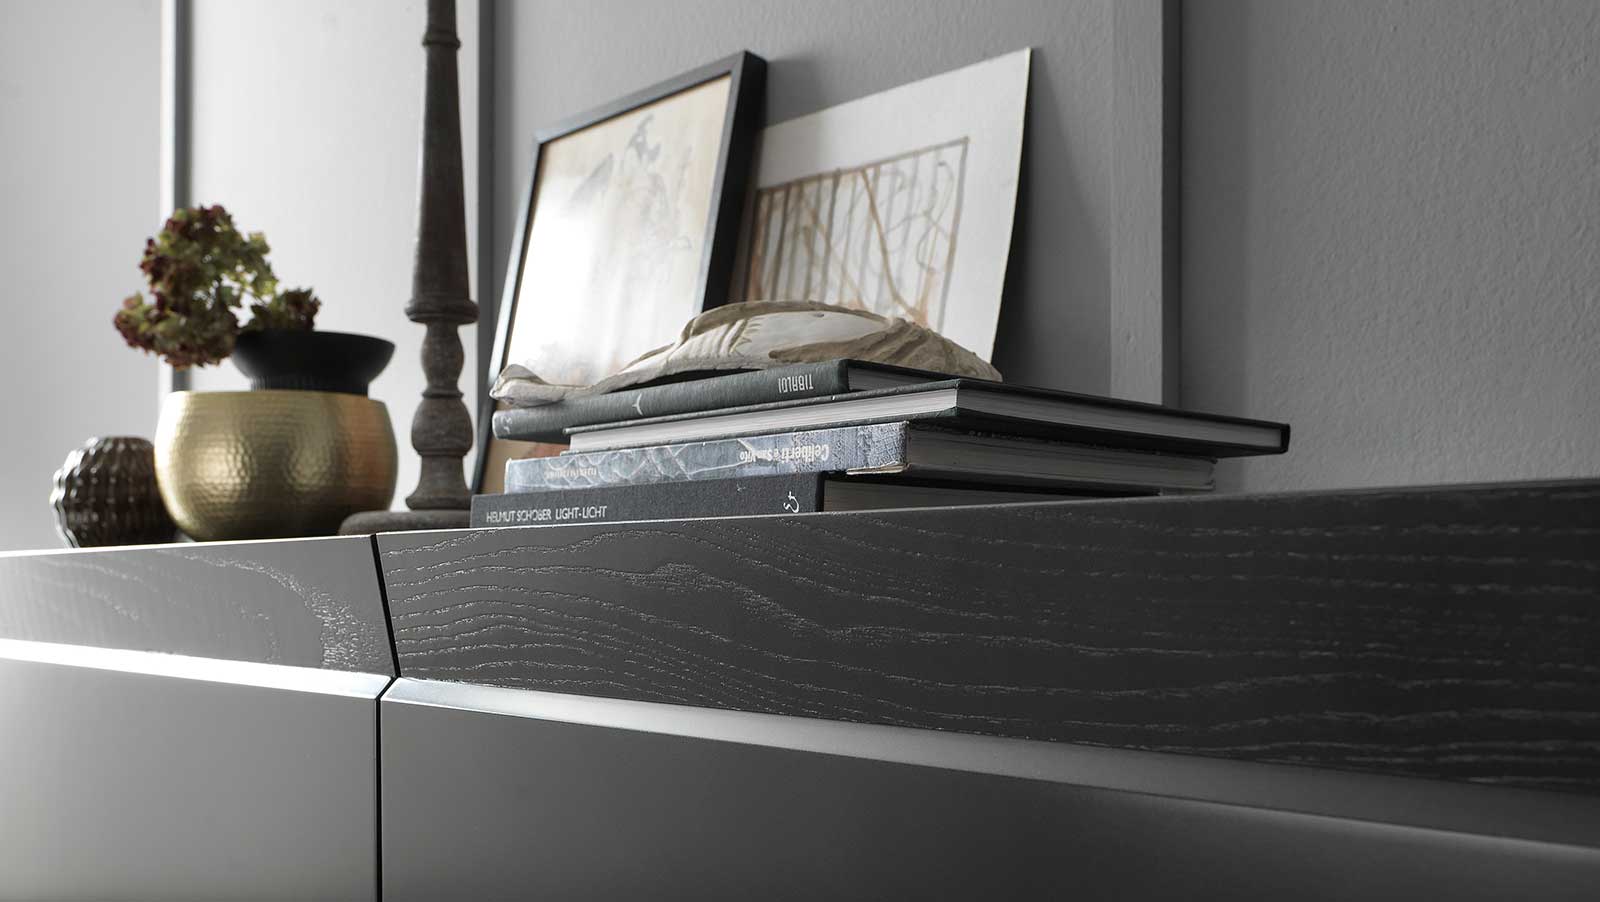 3 doors sideboard designed by Andrea Lucatello and made in Italy. Black ceramic top, anthracite grey frame. Glass shelves, no handles. Free home delivery.